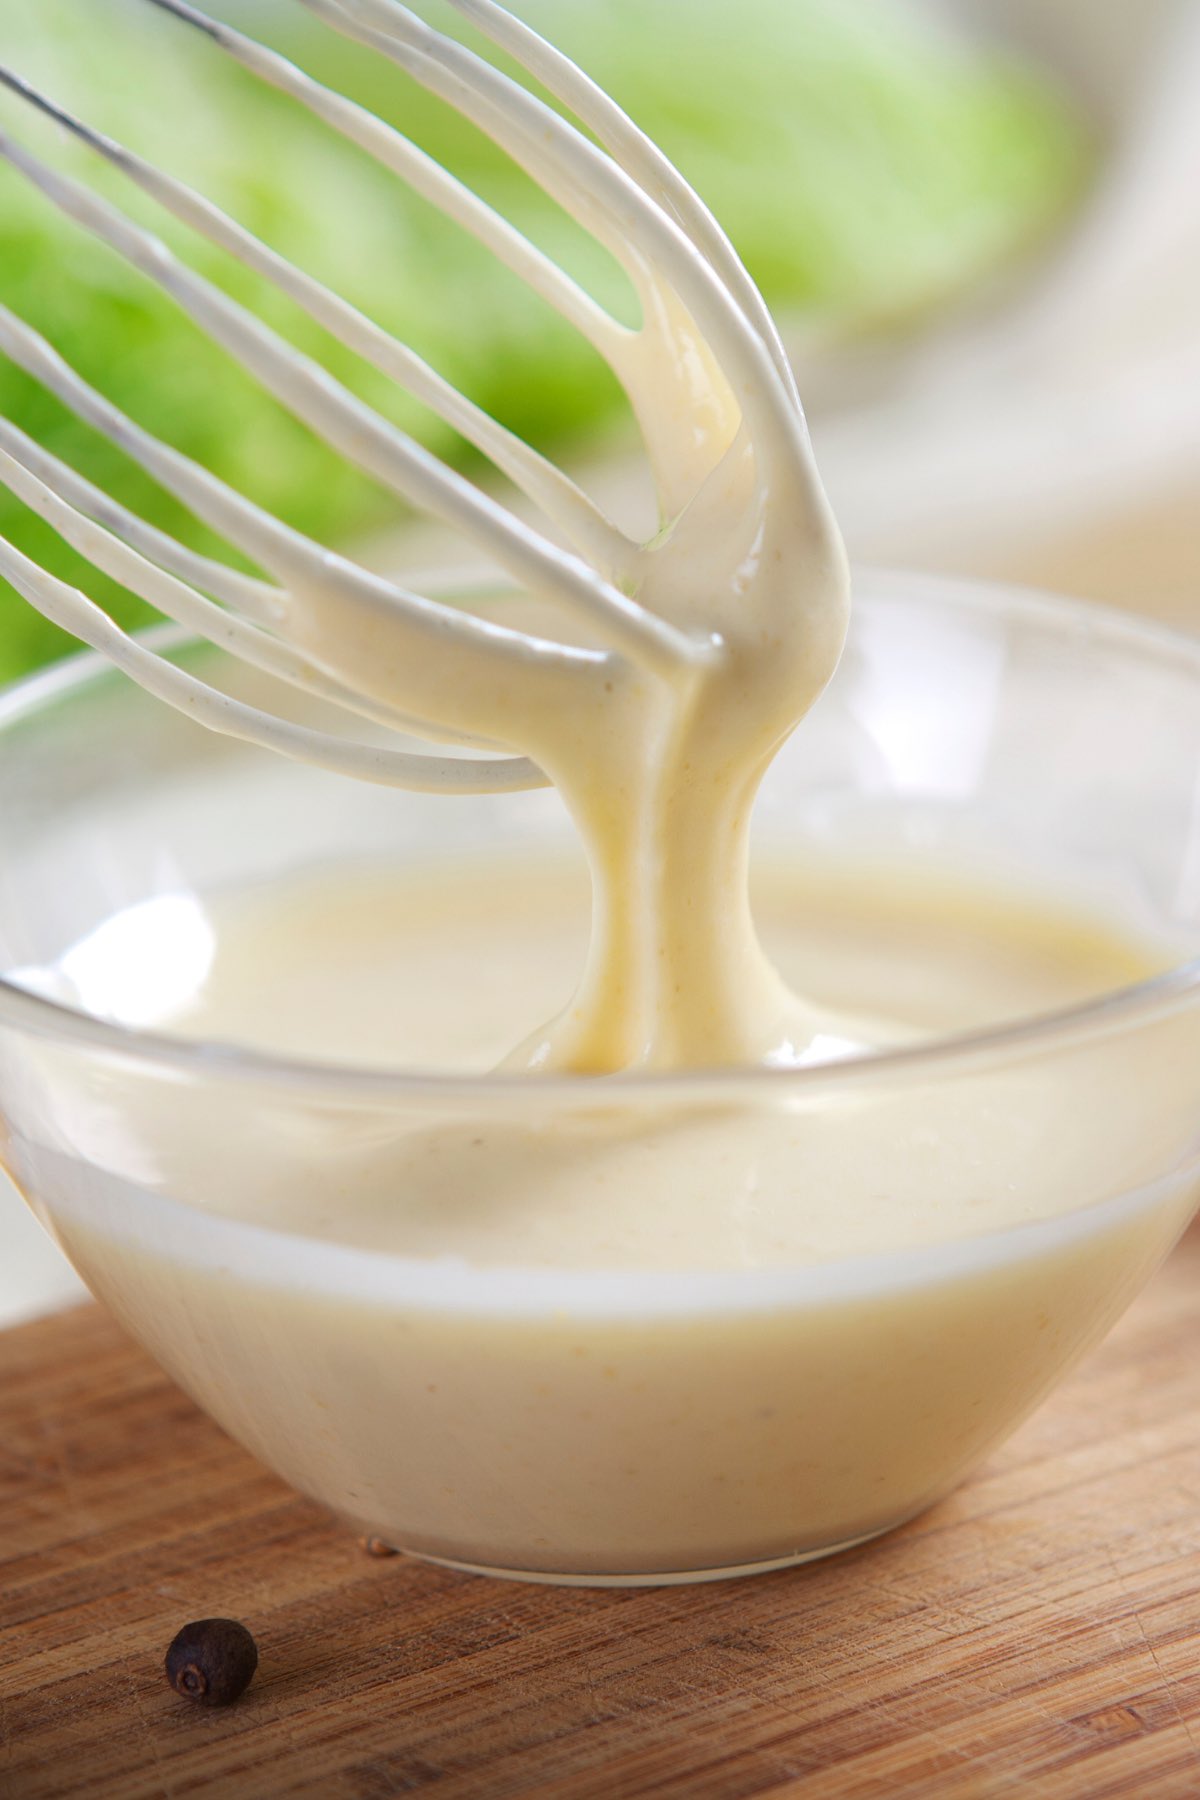 Photo showing homemade mayo in a clear mixing bowl.